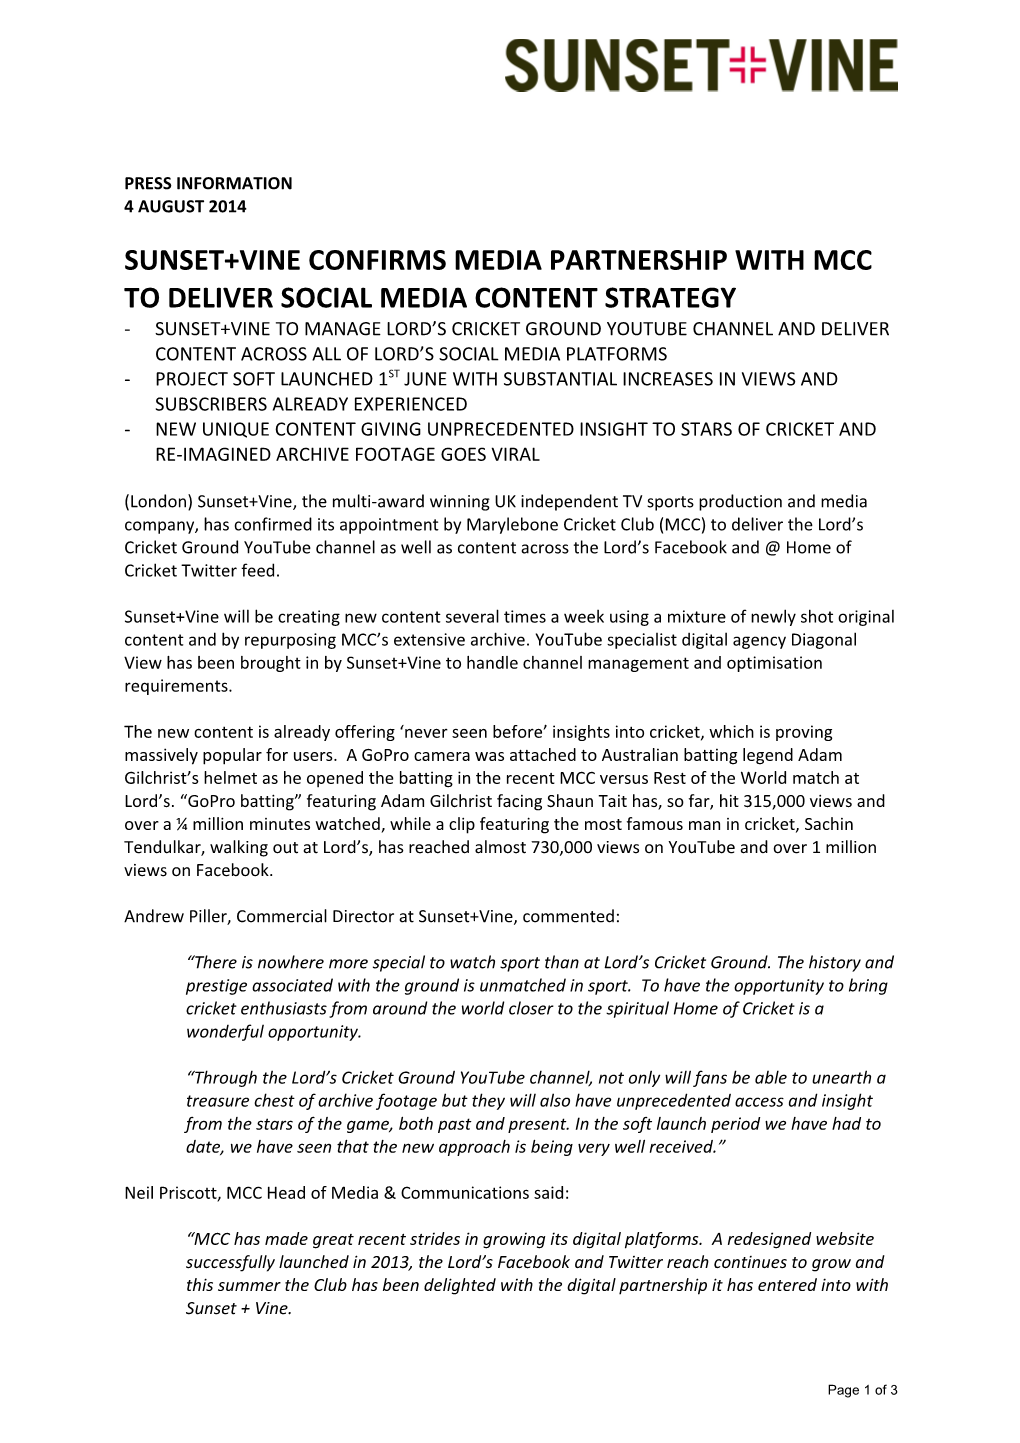 Sunset+Vine Confirms Media Partnership with Mcc to Deliver Social Media Content Strategy